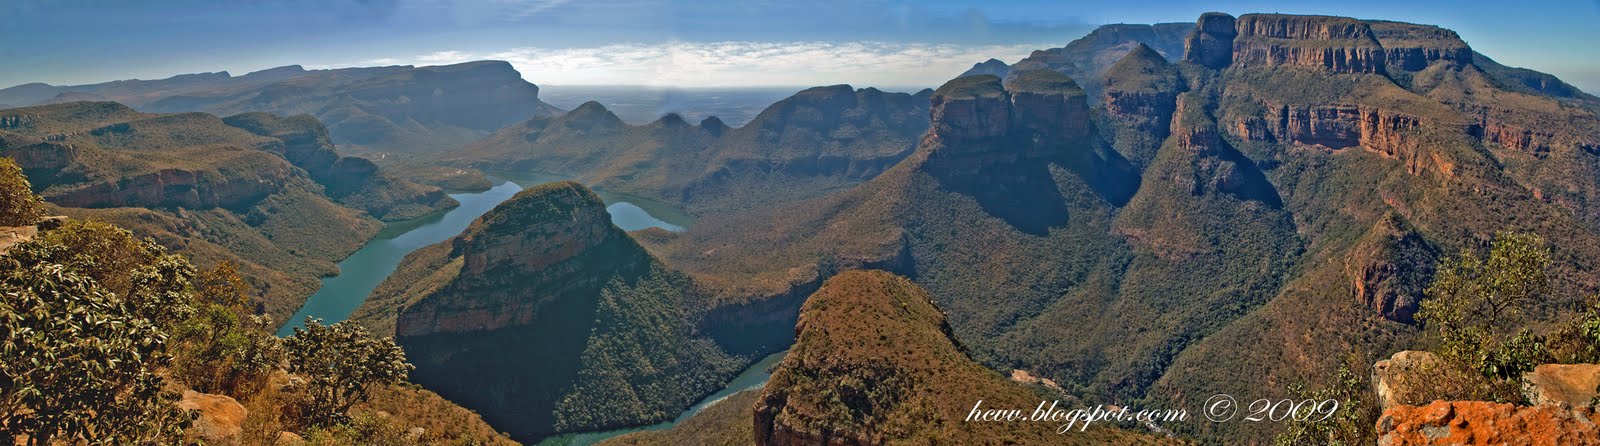 [blyde+river++canyon,+south+africaed.jpg]